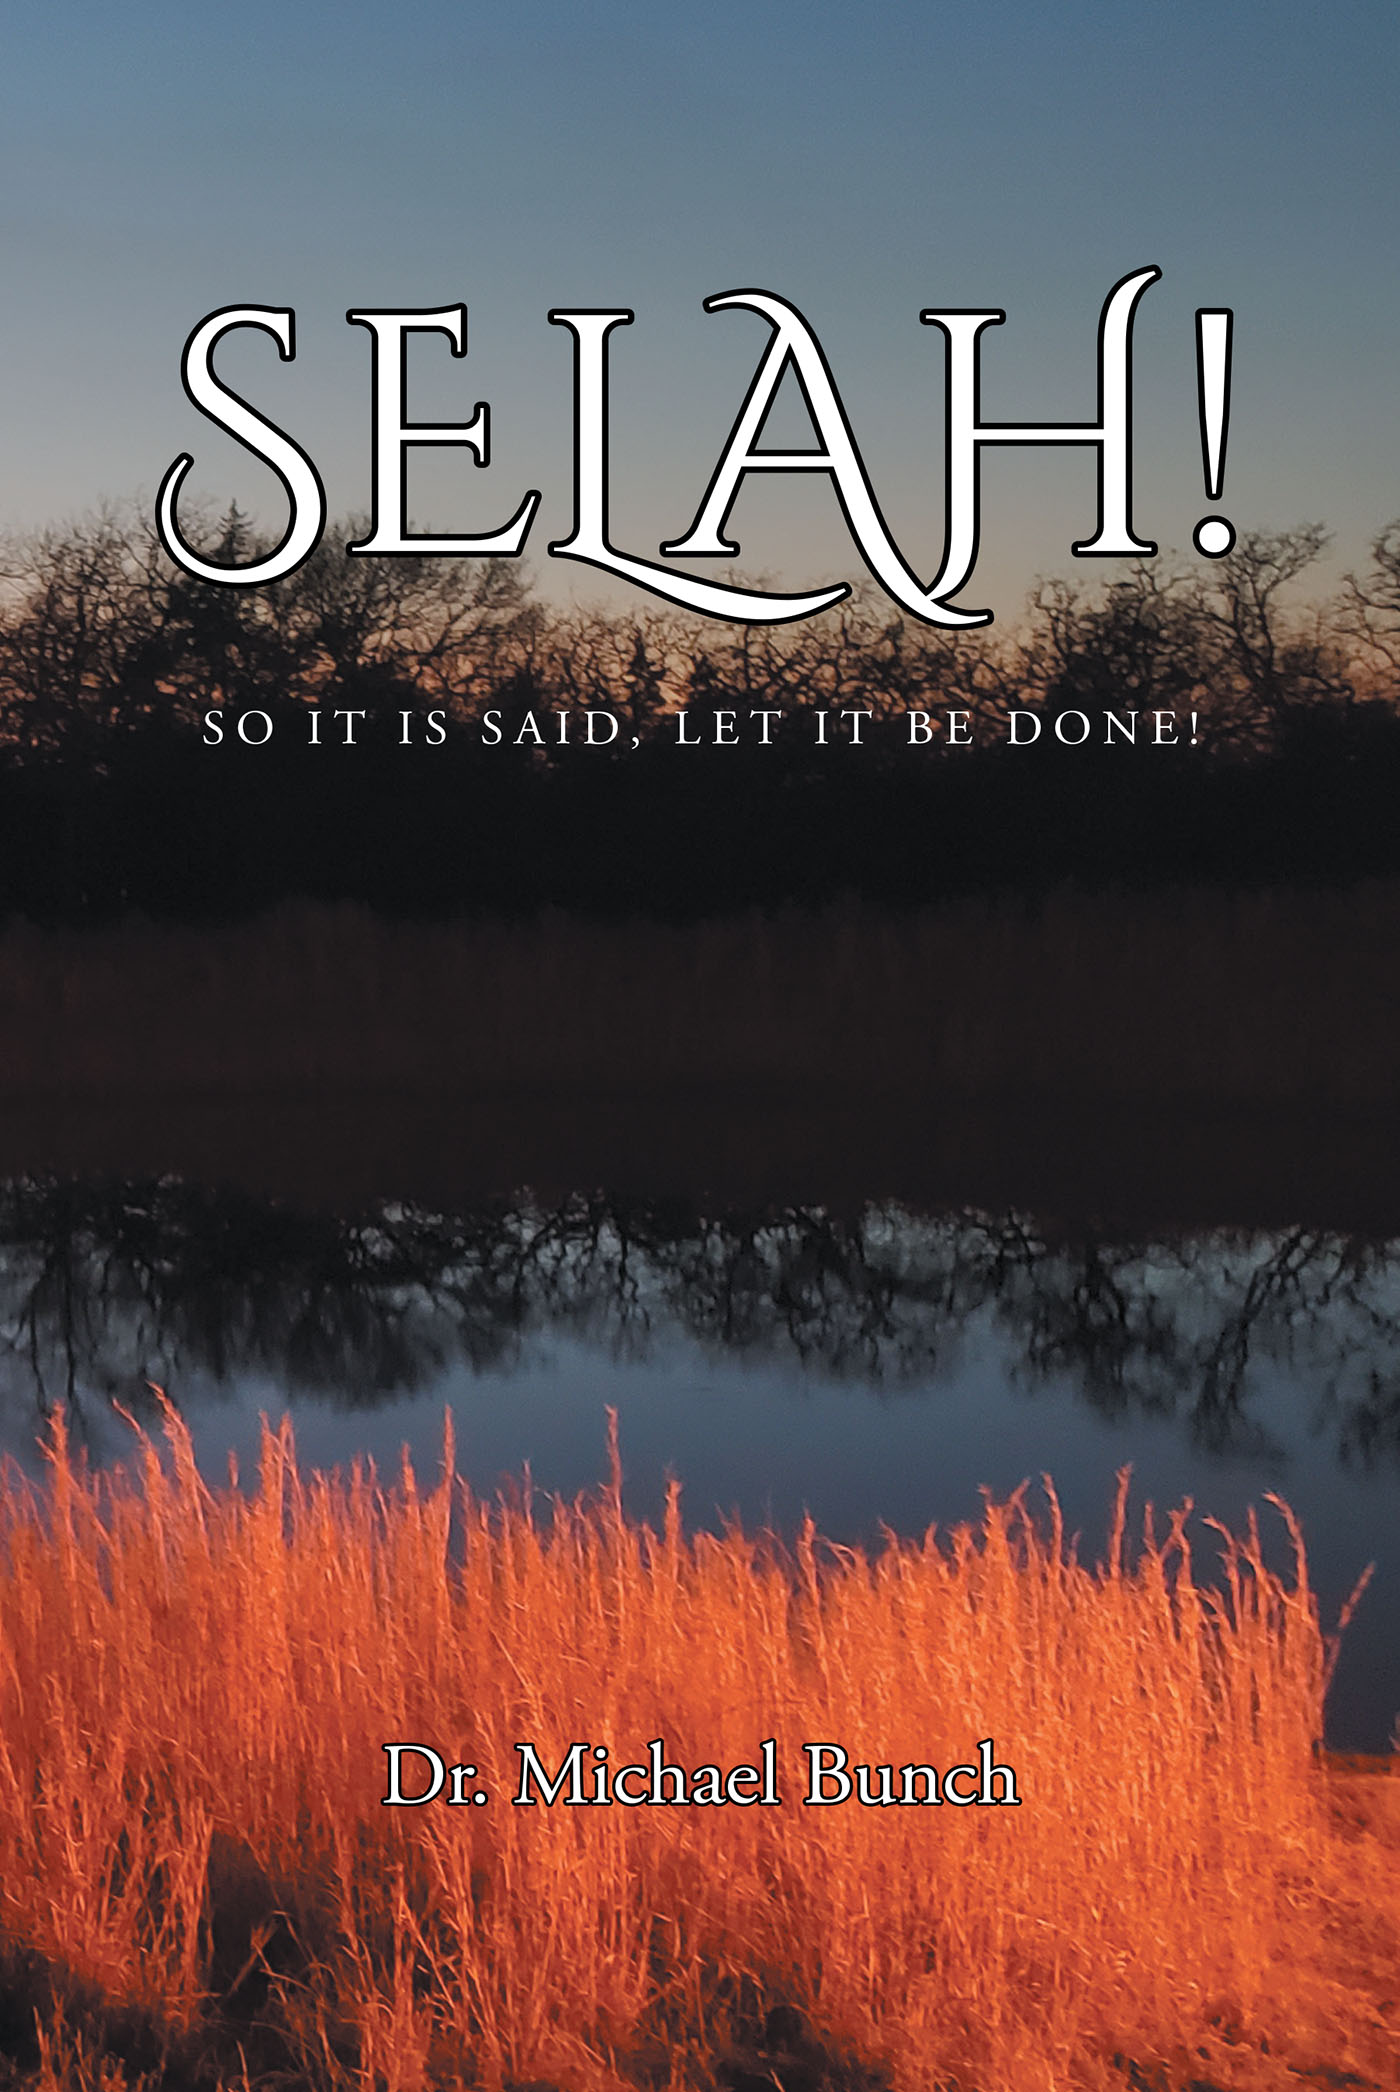 Author Dr. Michael Bunch’s New Book, “Selah! So It Is Said, Let It Be Done!” is a Stirring Exploration of How Christian Ideals and Values Can be Applied to Any Situation